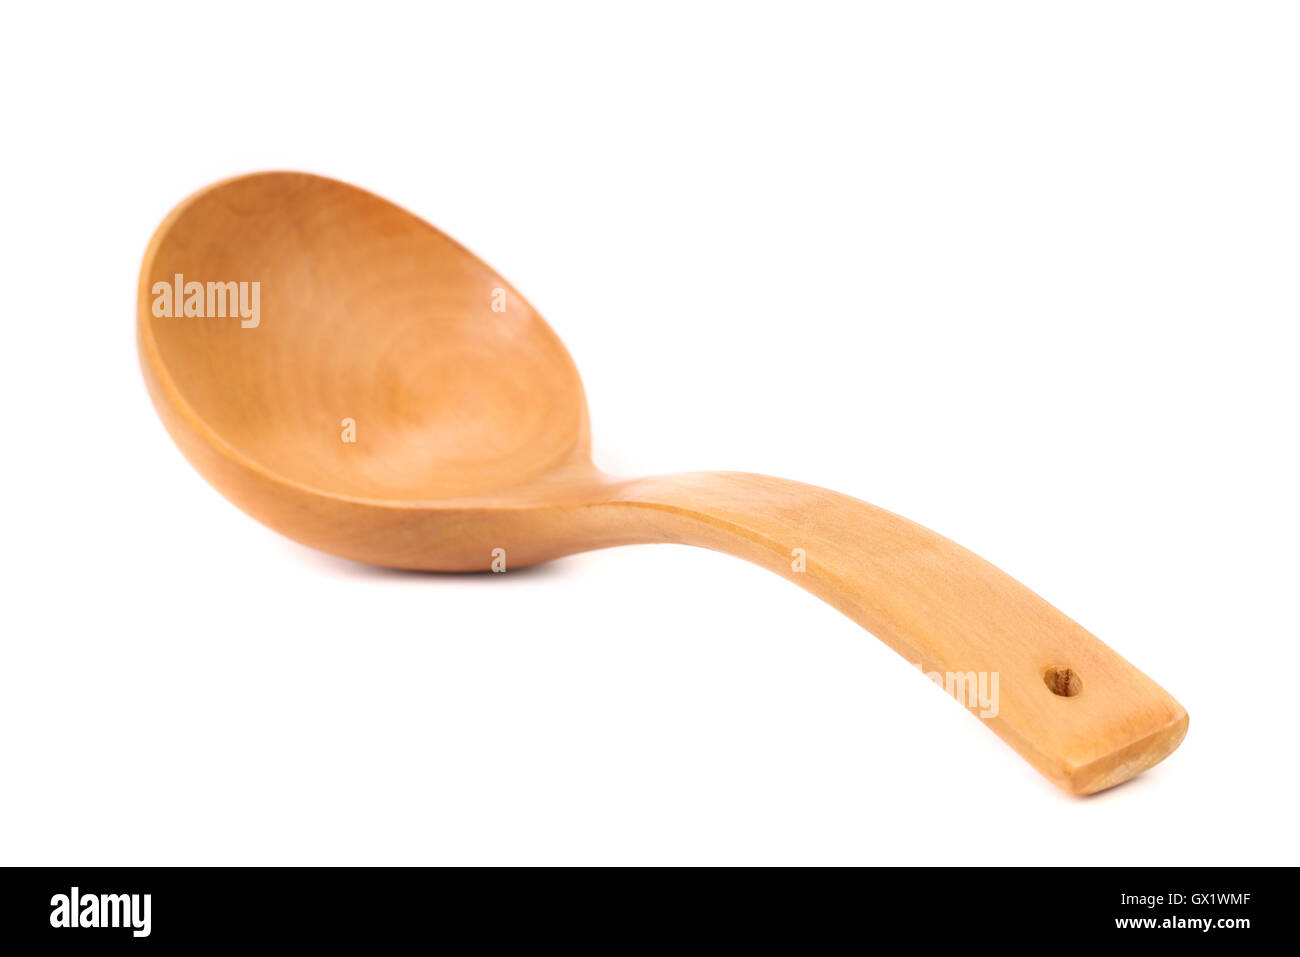 Wooden Spoon isolated on white background Stock Photo